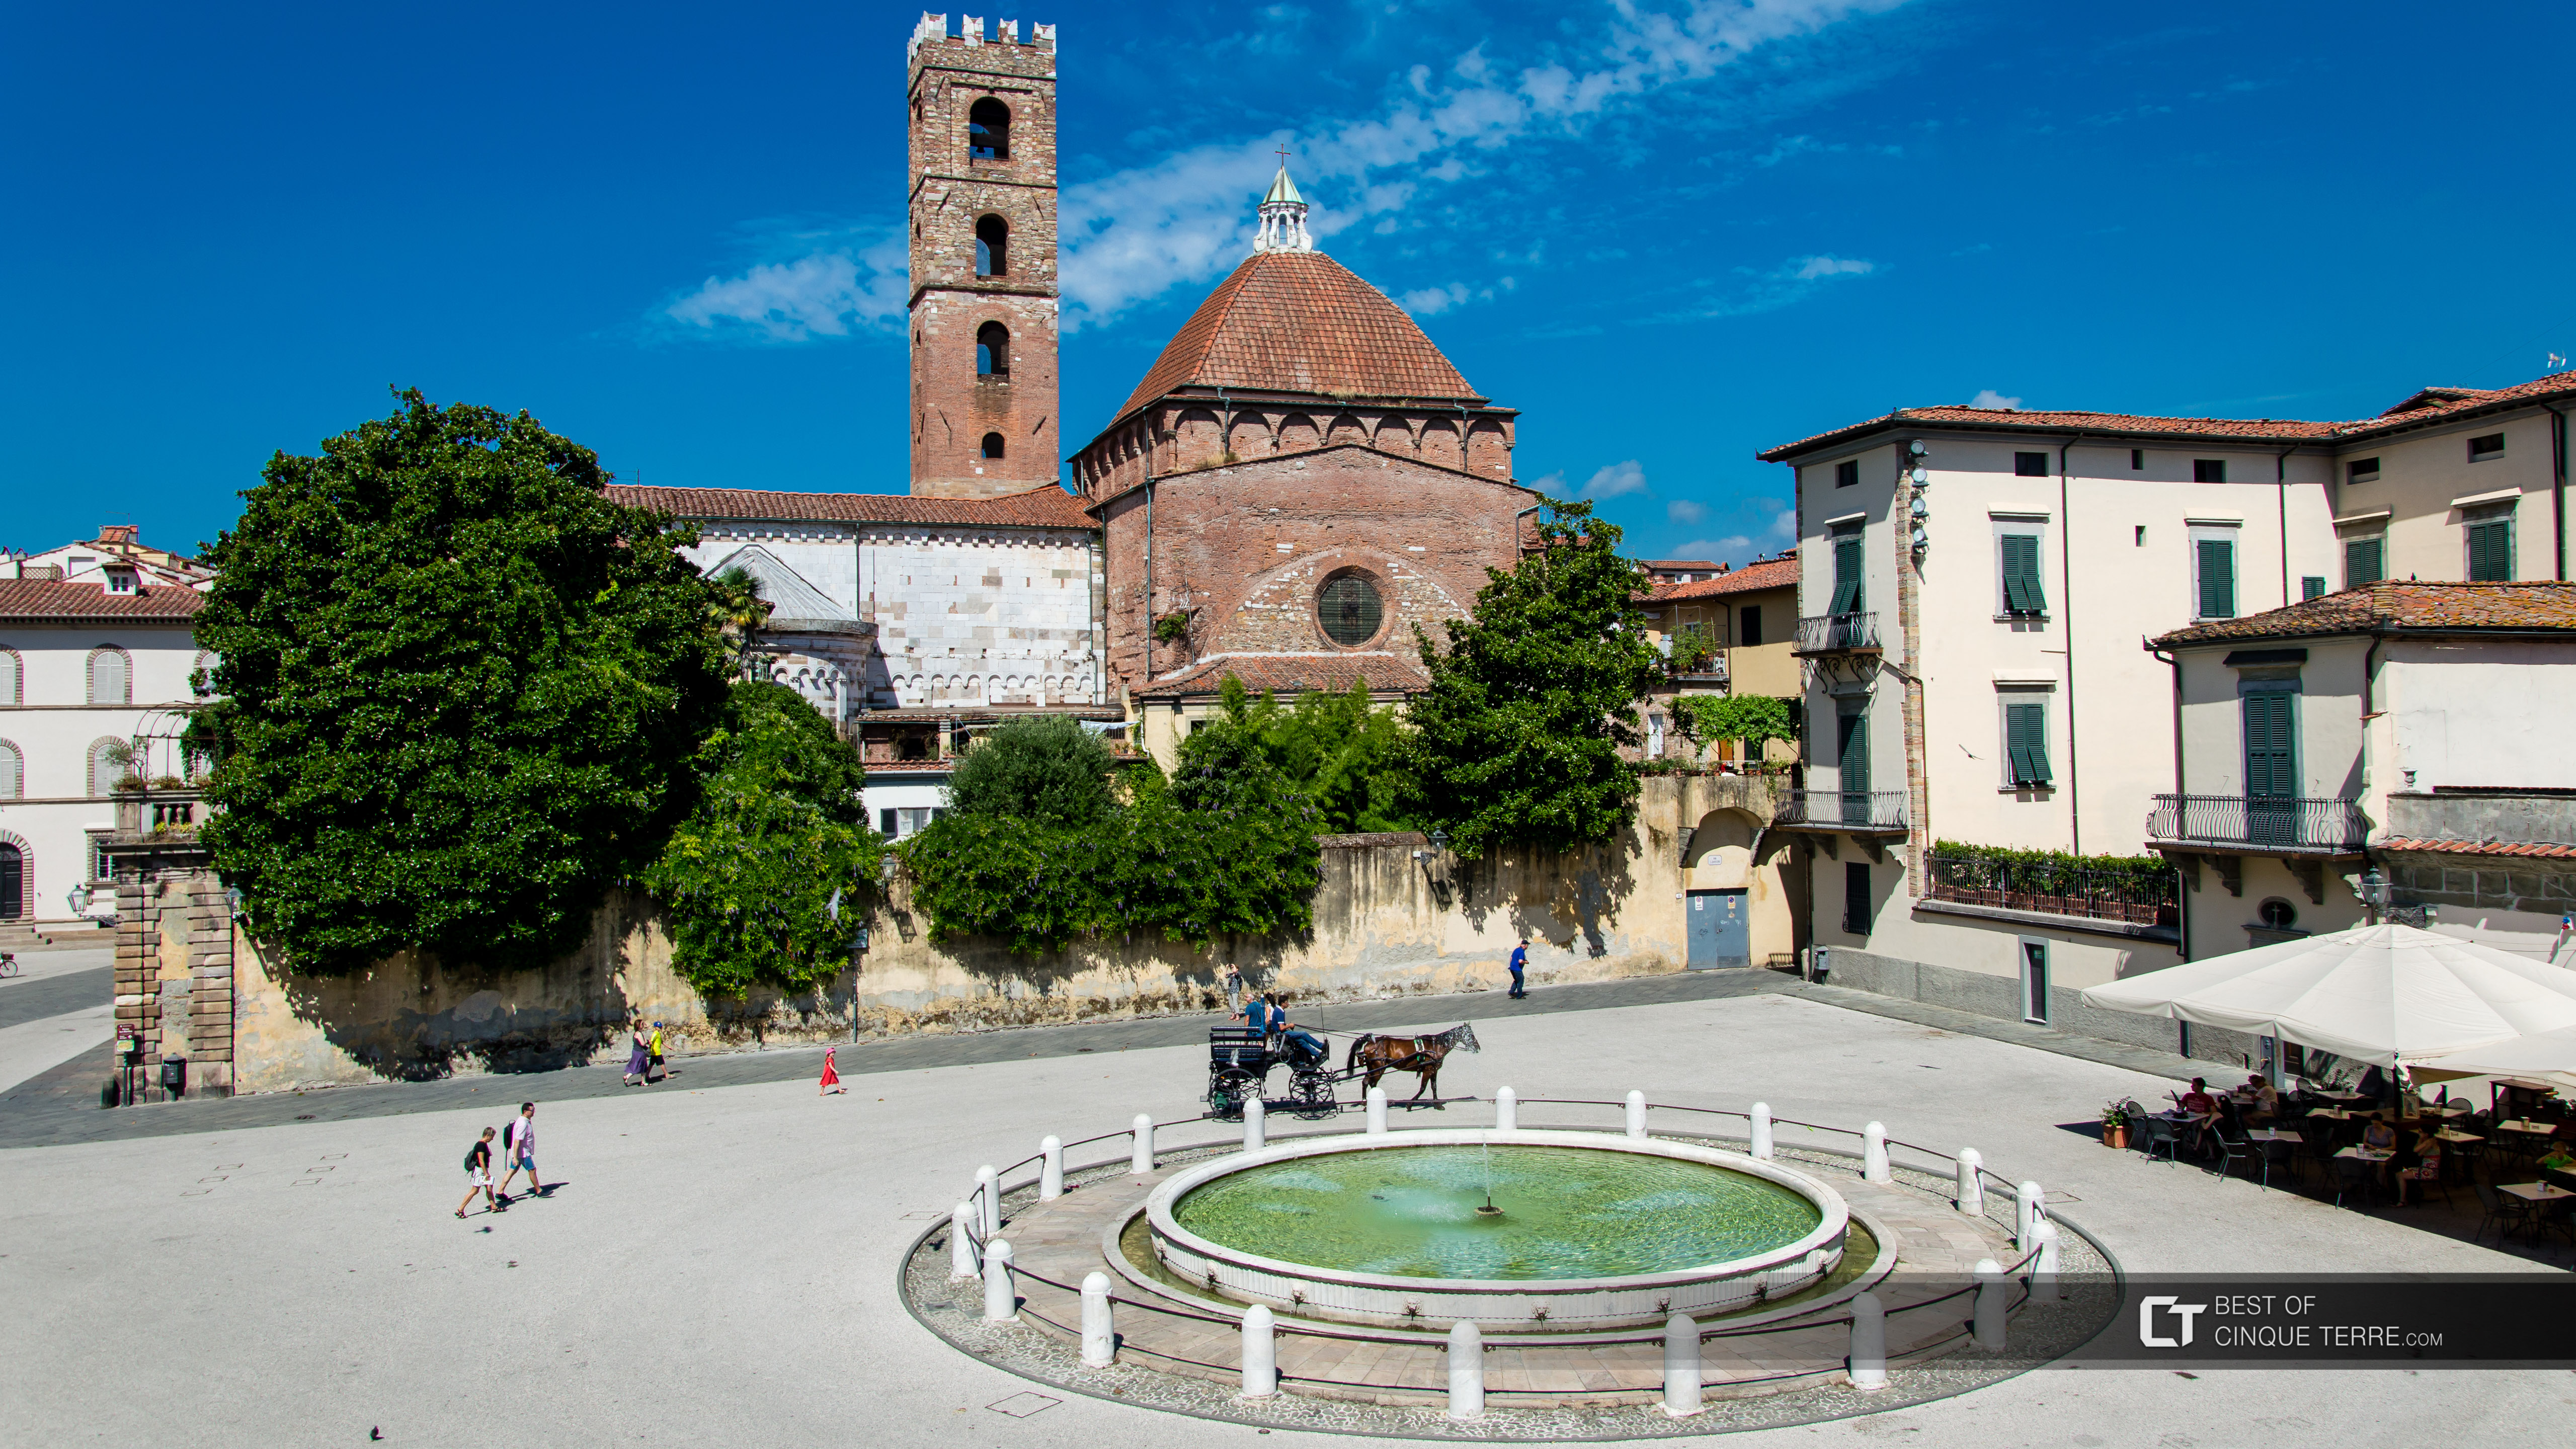 Piazza Antelminelli and the Bell Tower of the Church of Saint Giovanni, Lucca, Italy